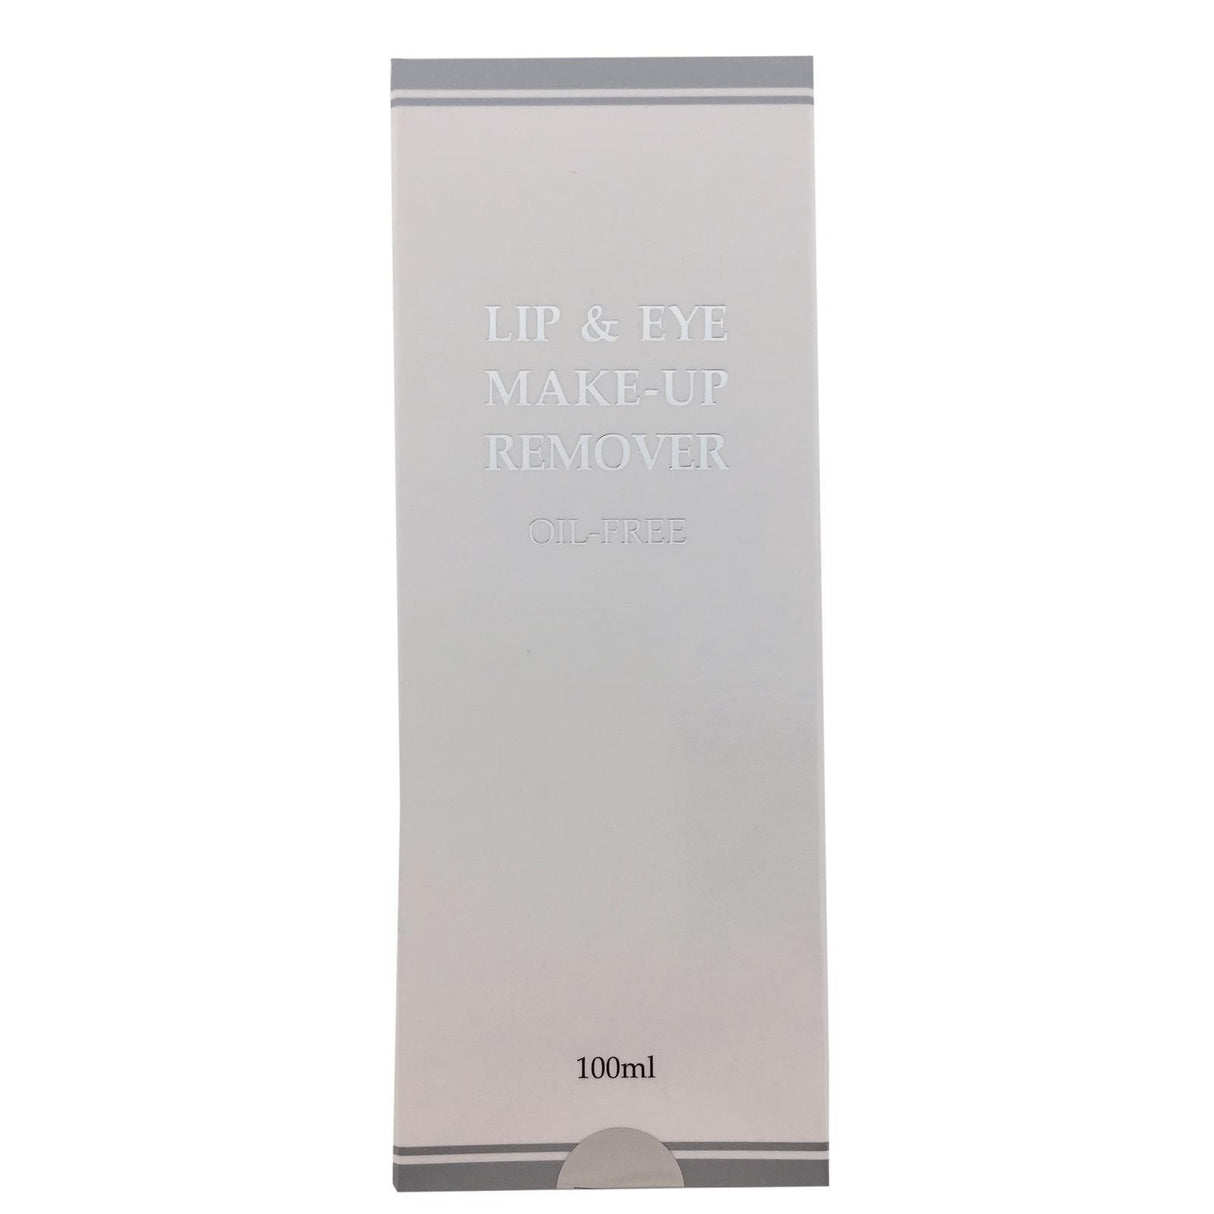 MSE Lashes: Make Up remover-100ml - MSE - The Beauty Company